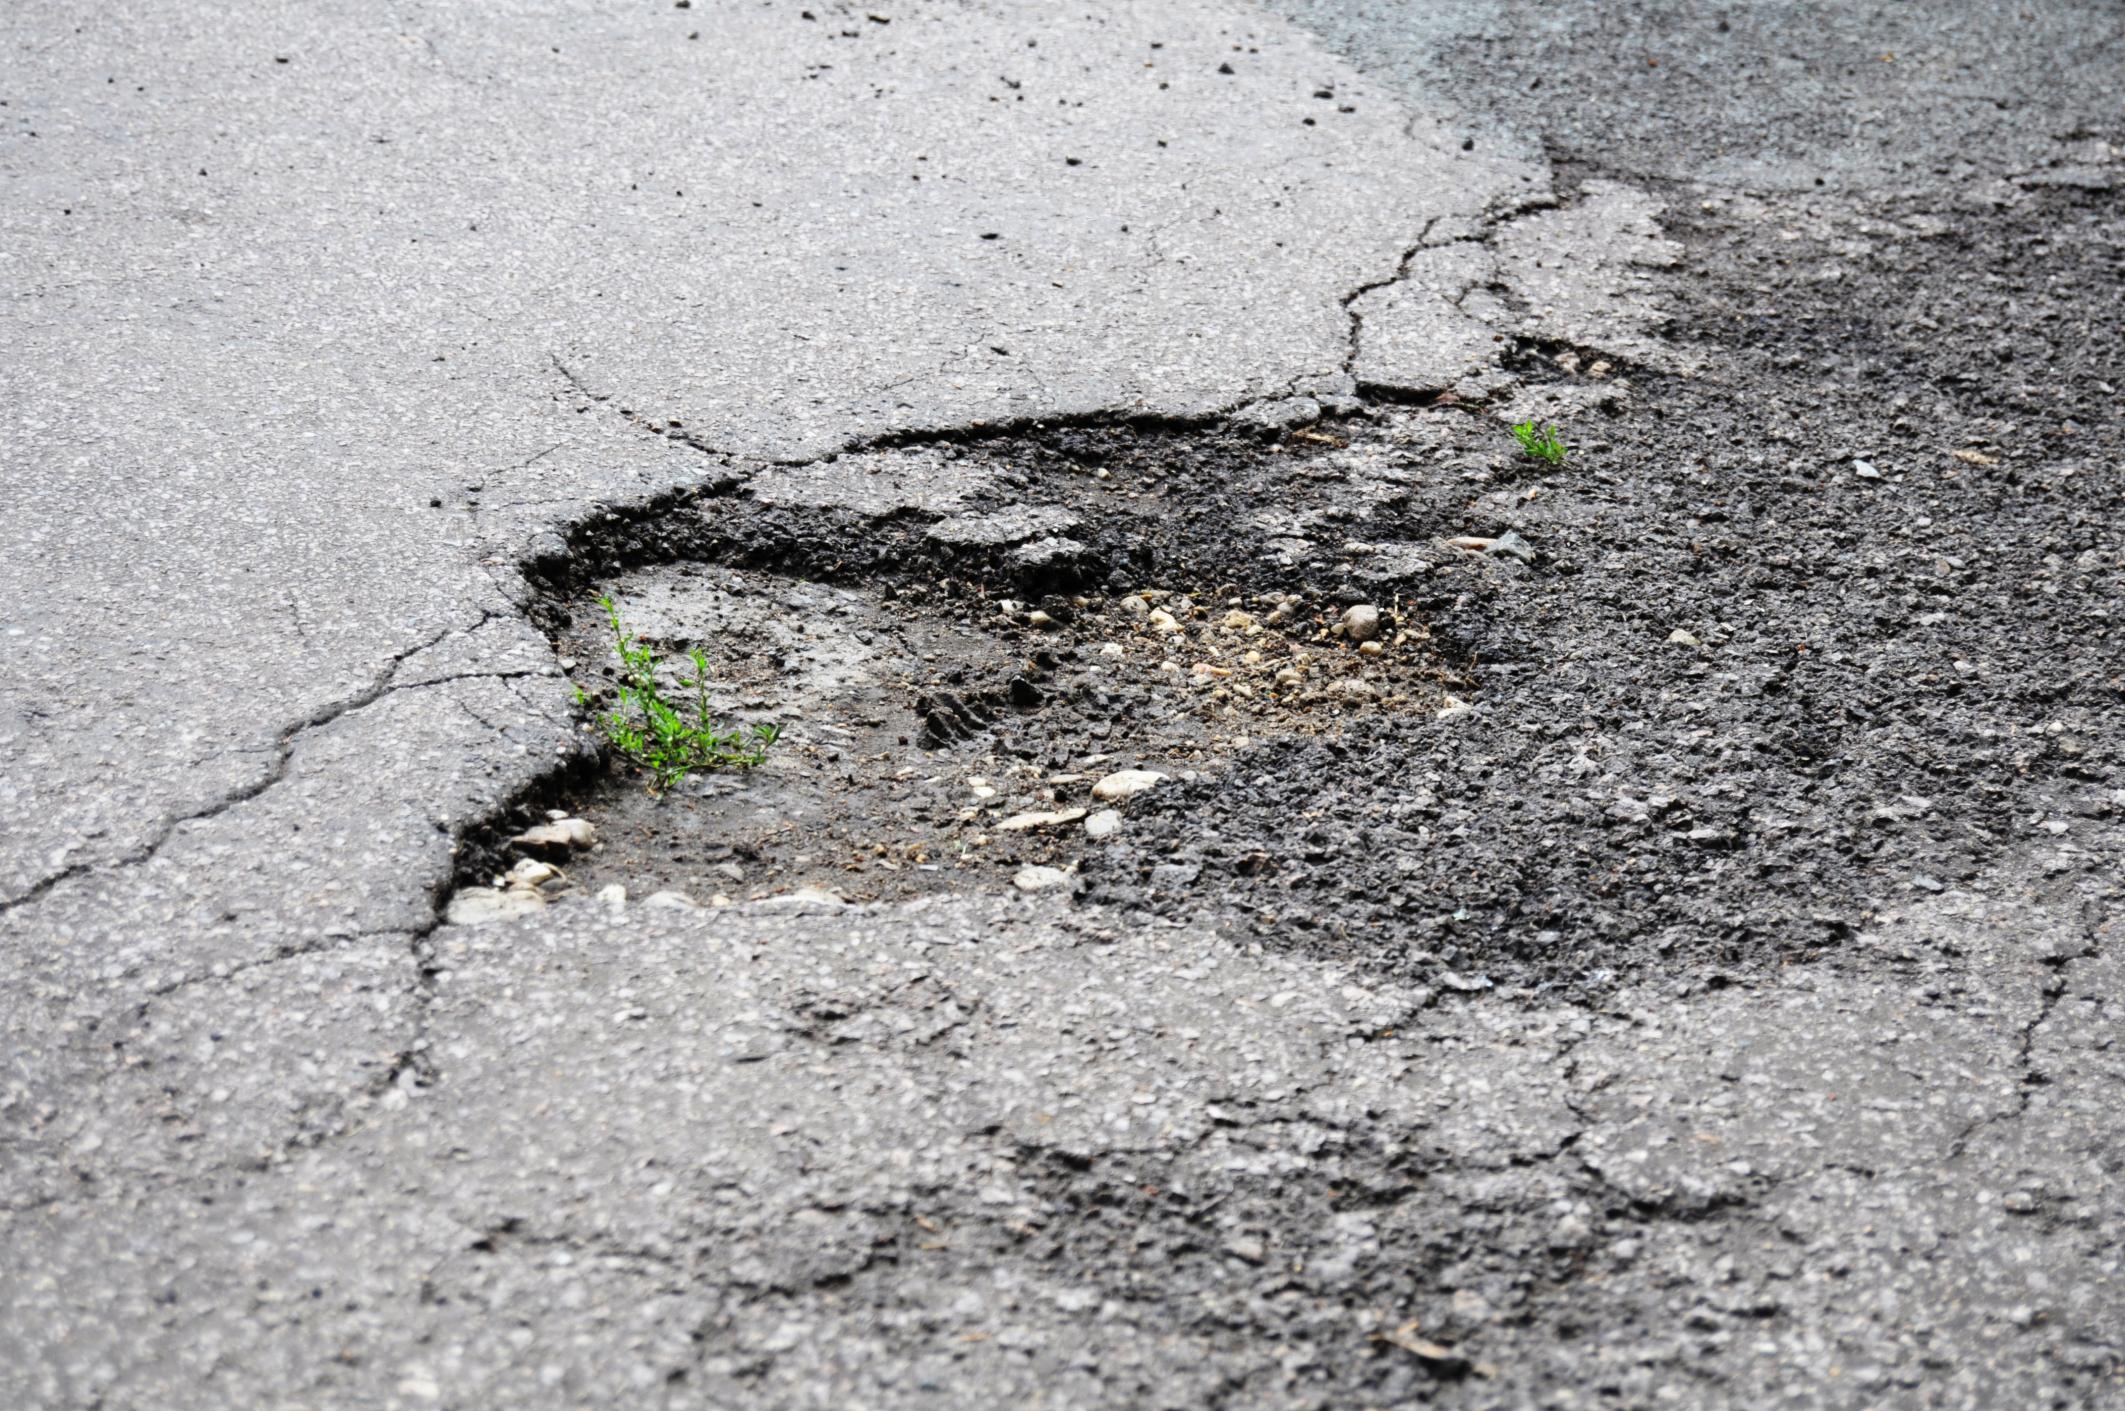 damaged car of road full of cracked potholes in pavement